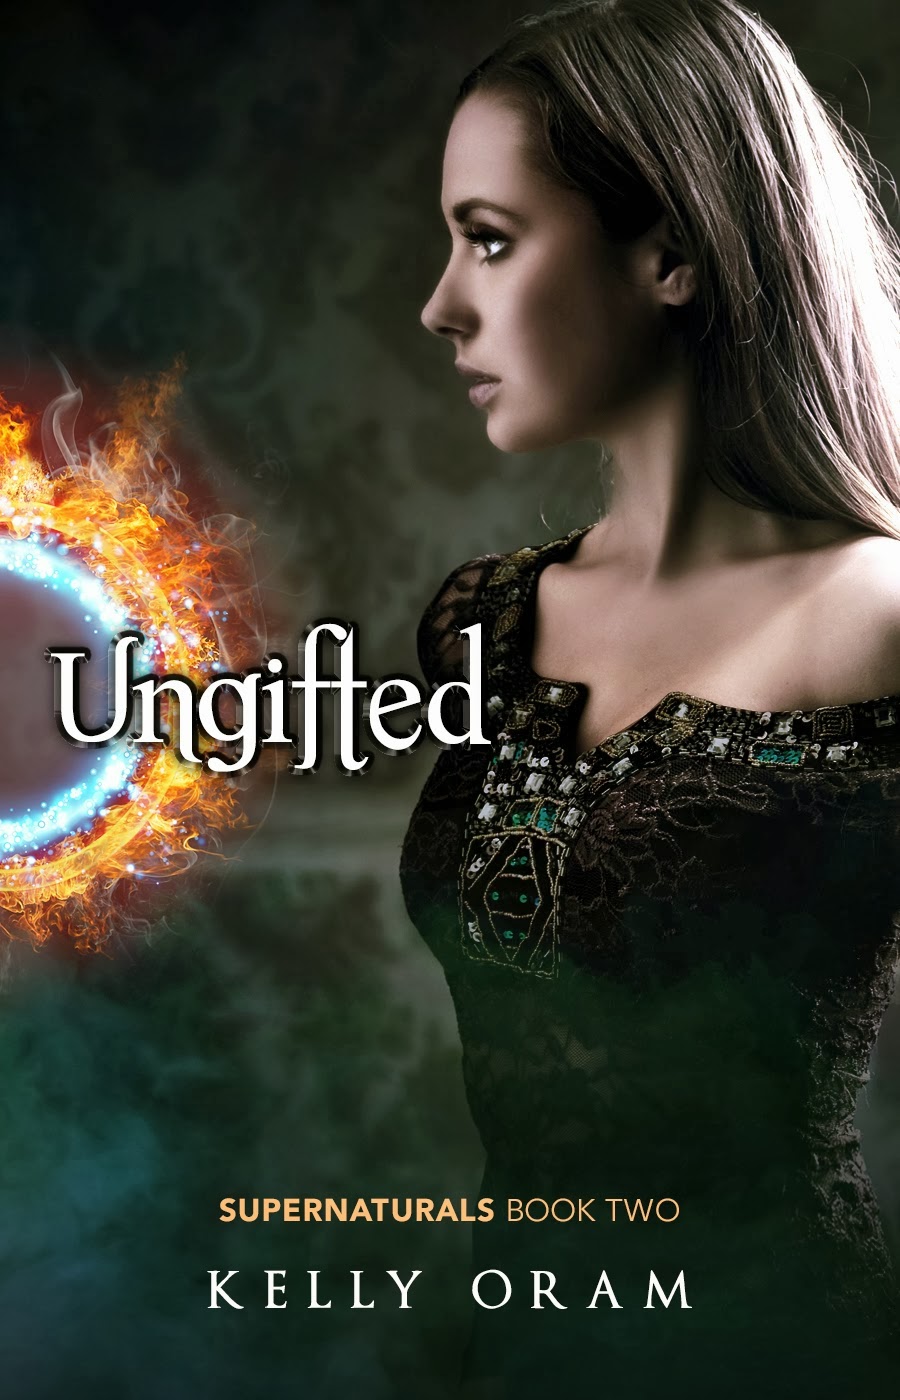 https://www.goodreads.com/book/show/18740852-ungifted